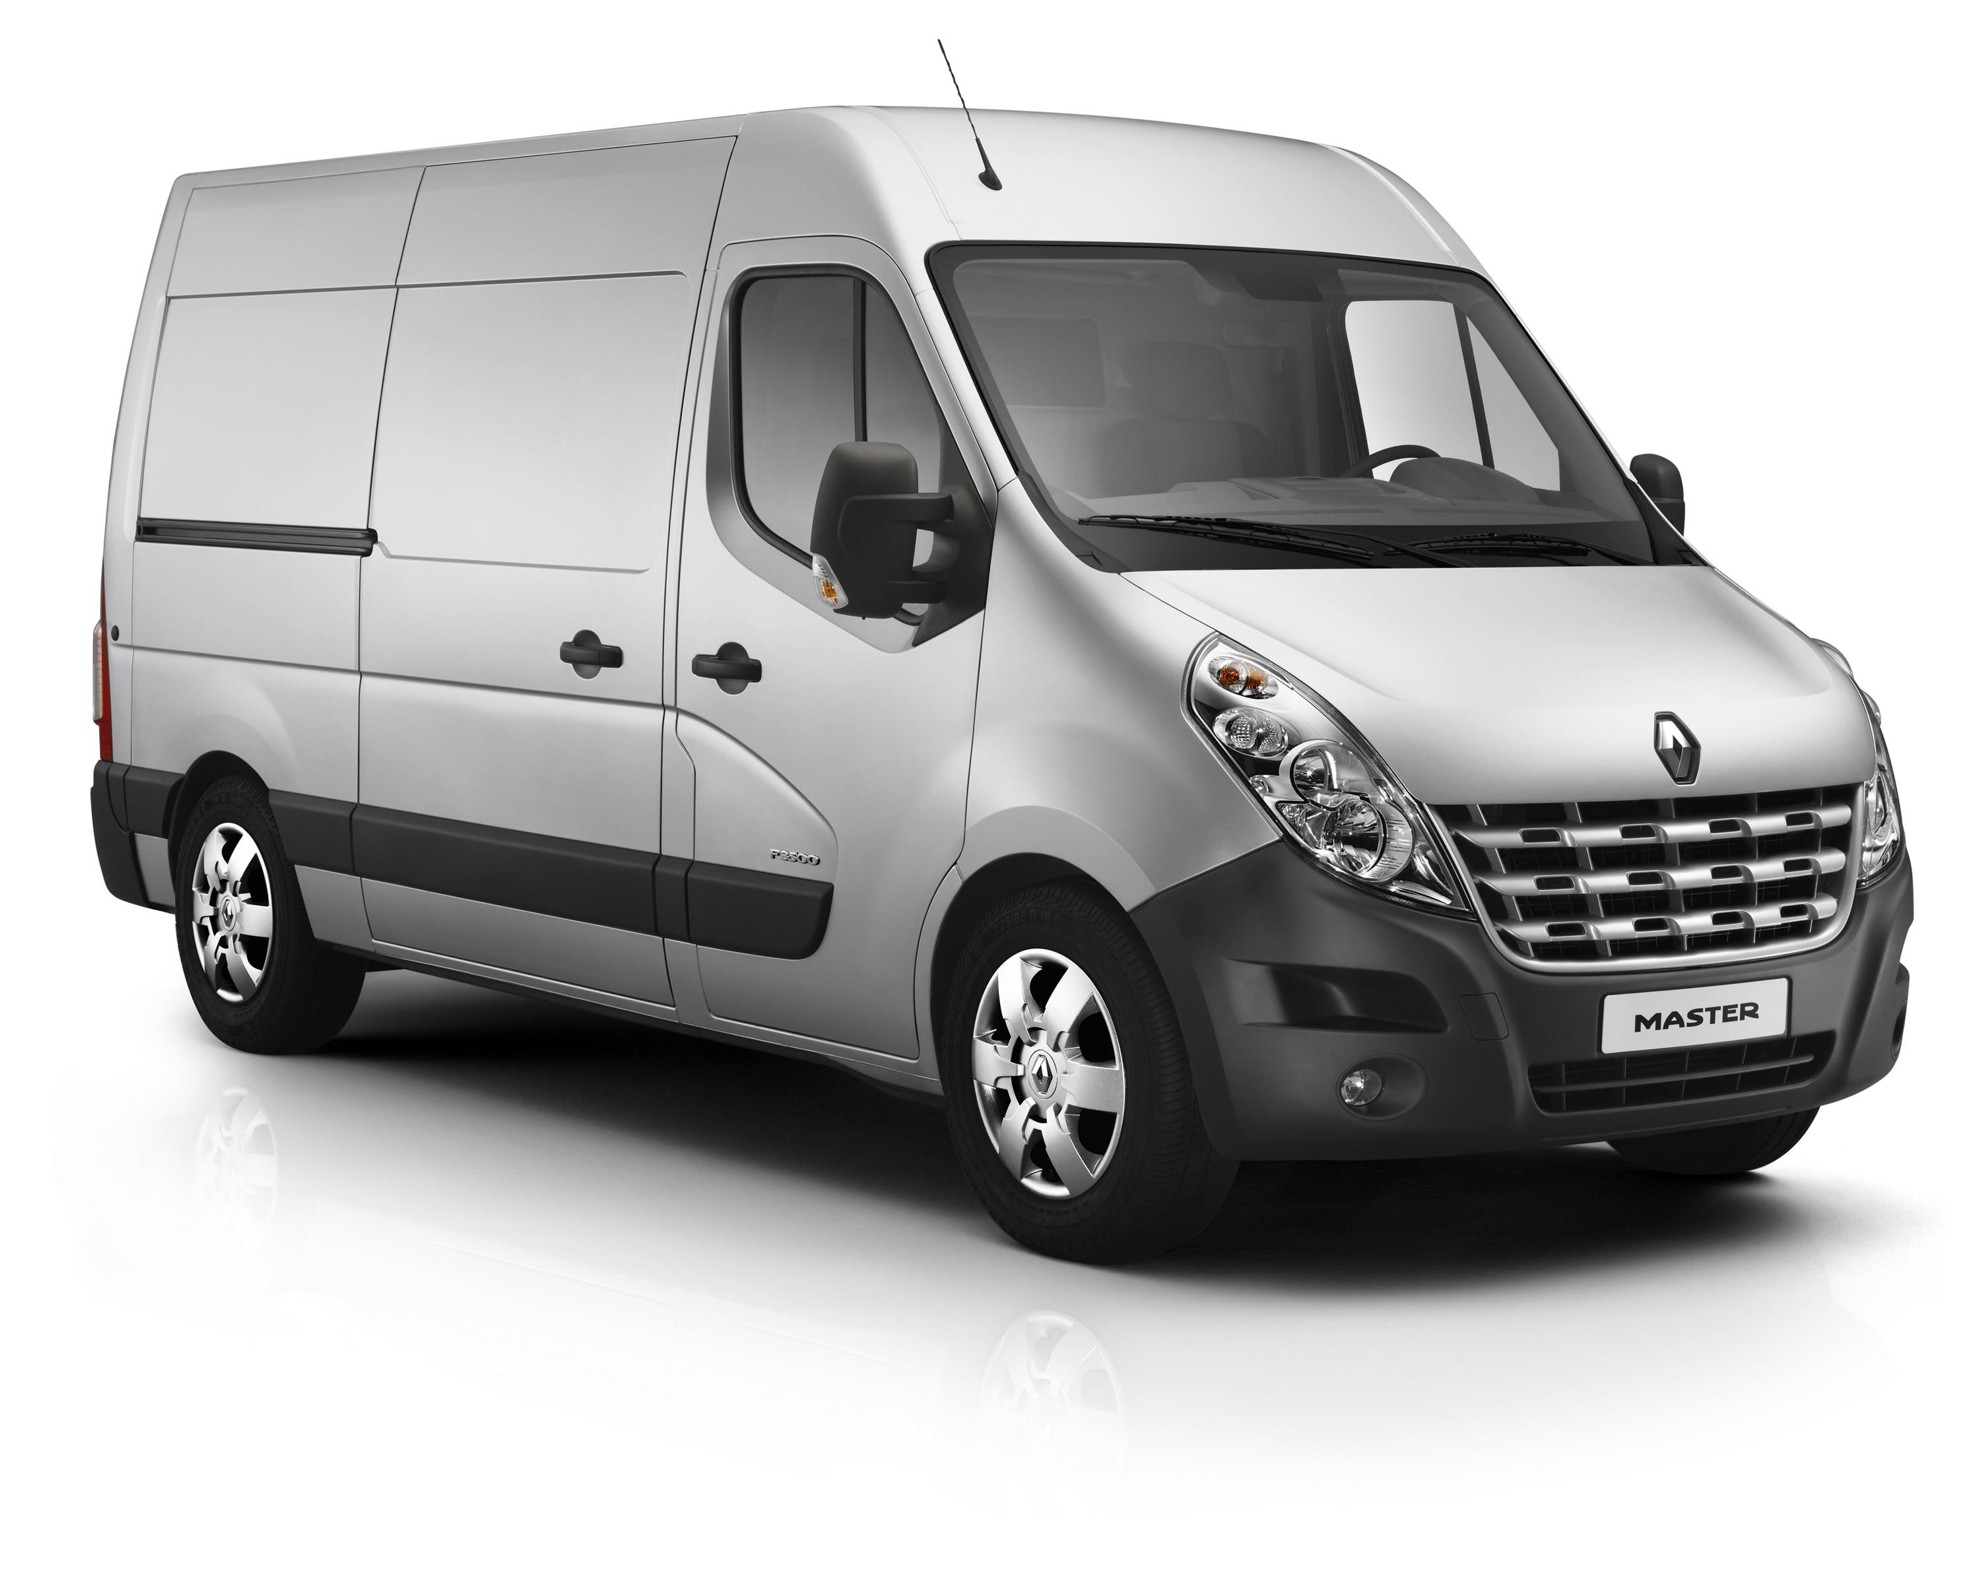 Renault Master Energy dCi 100 & Energy dCi 125: a continuing offensive in large vans